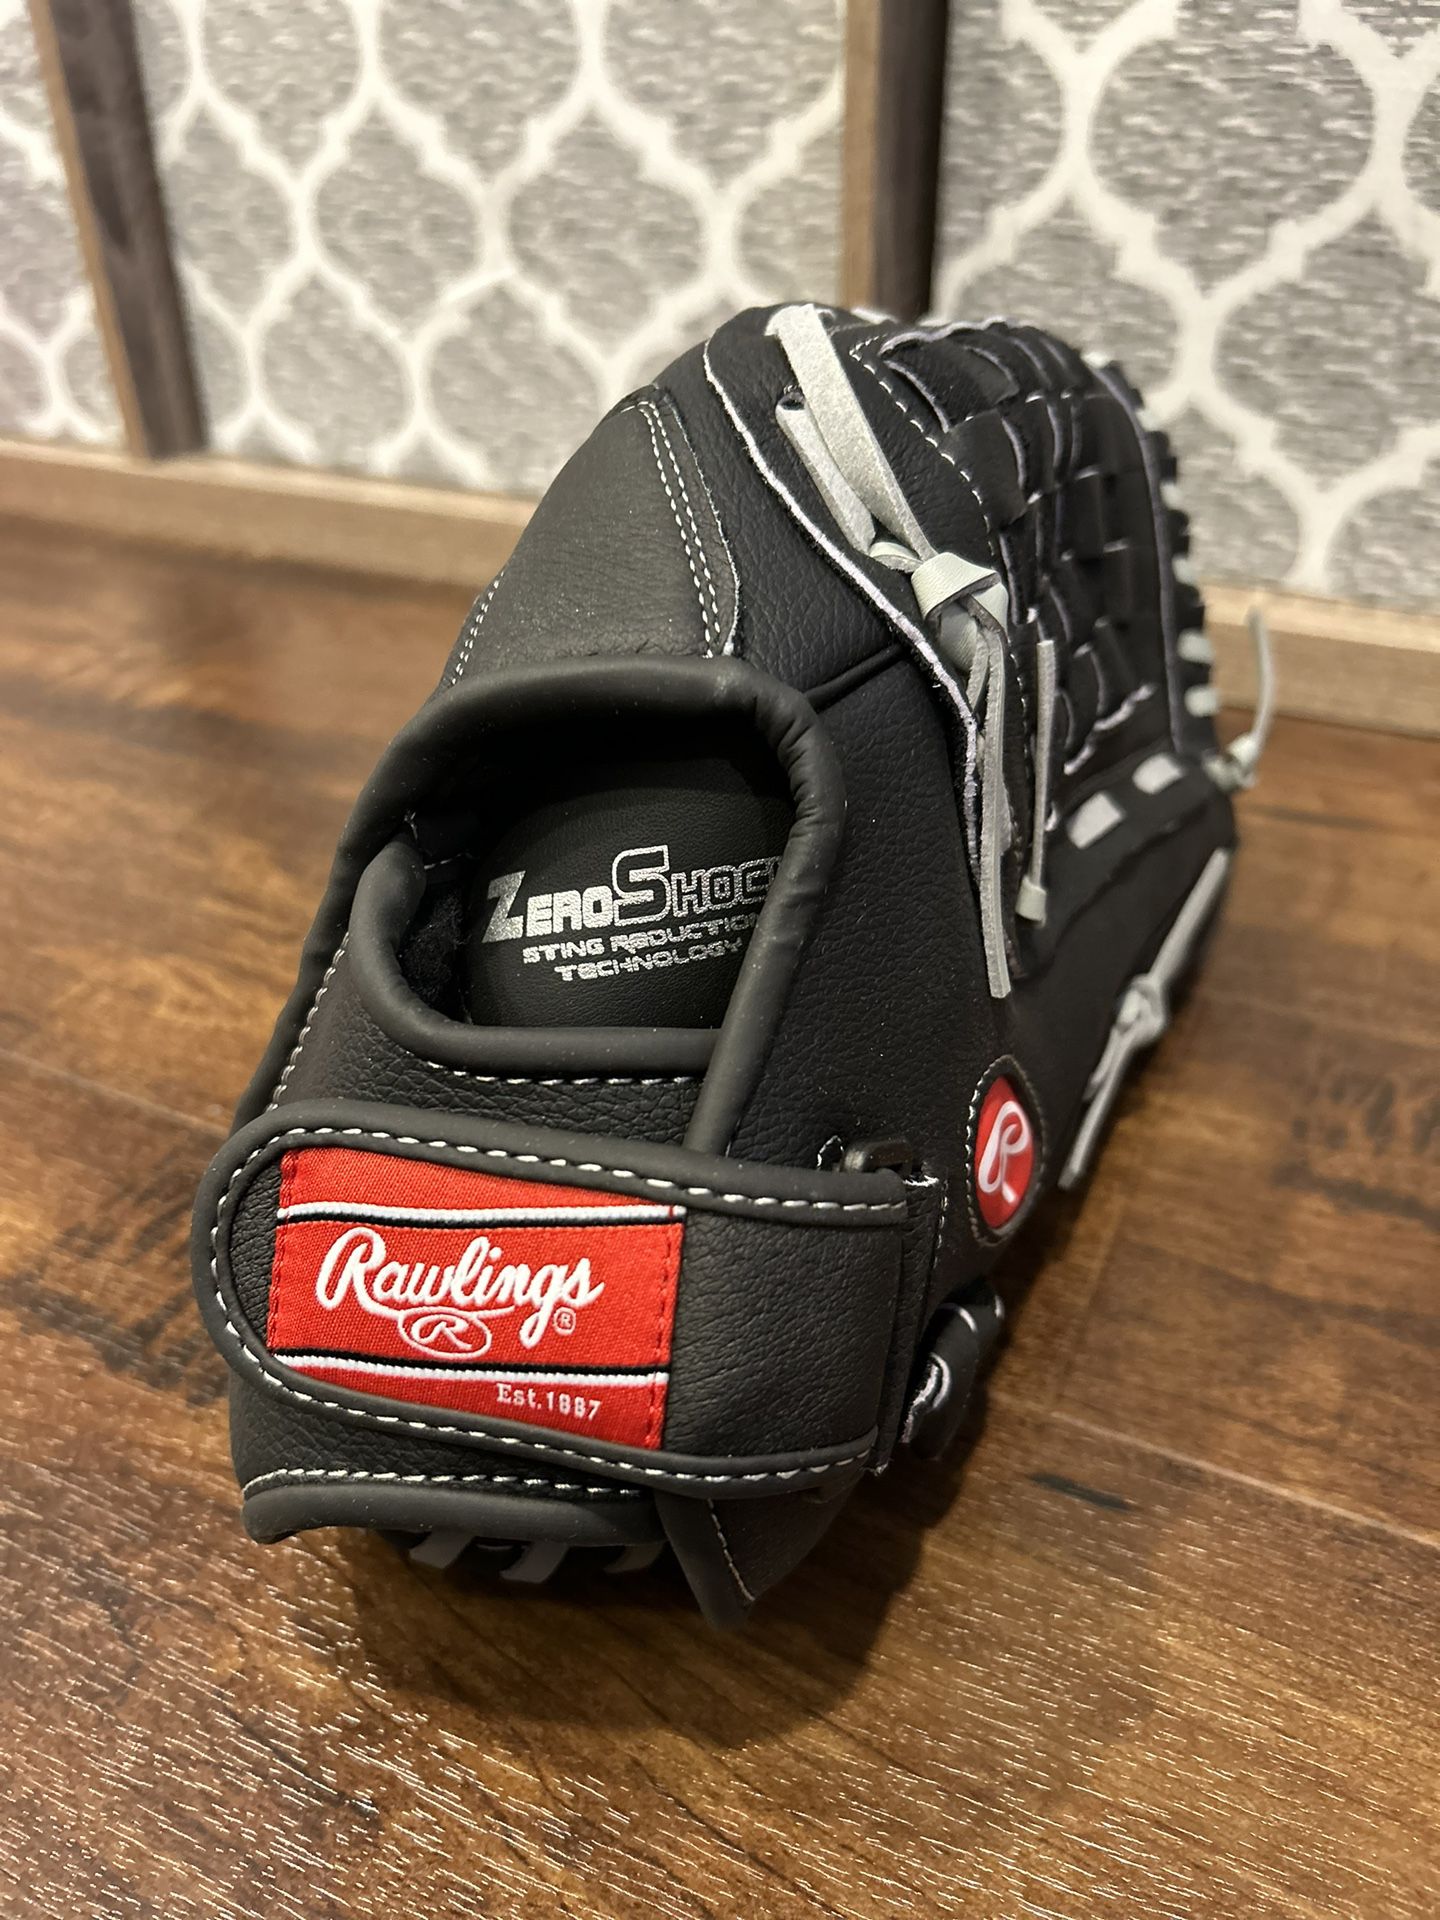 New Rawlings 14 Inch Softball Glove, Right-handed